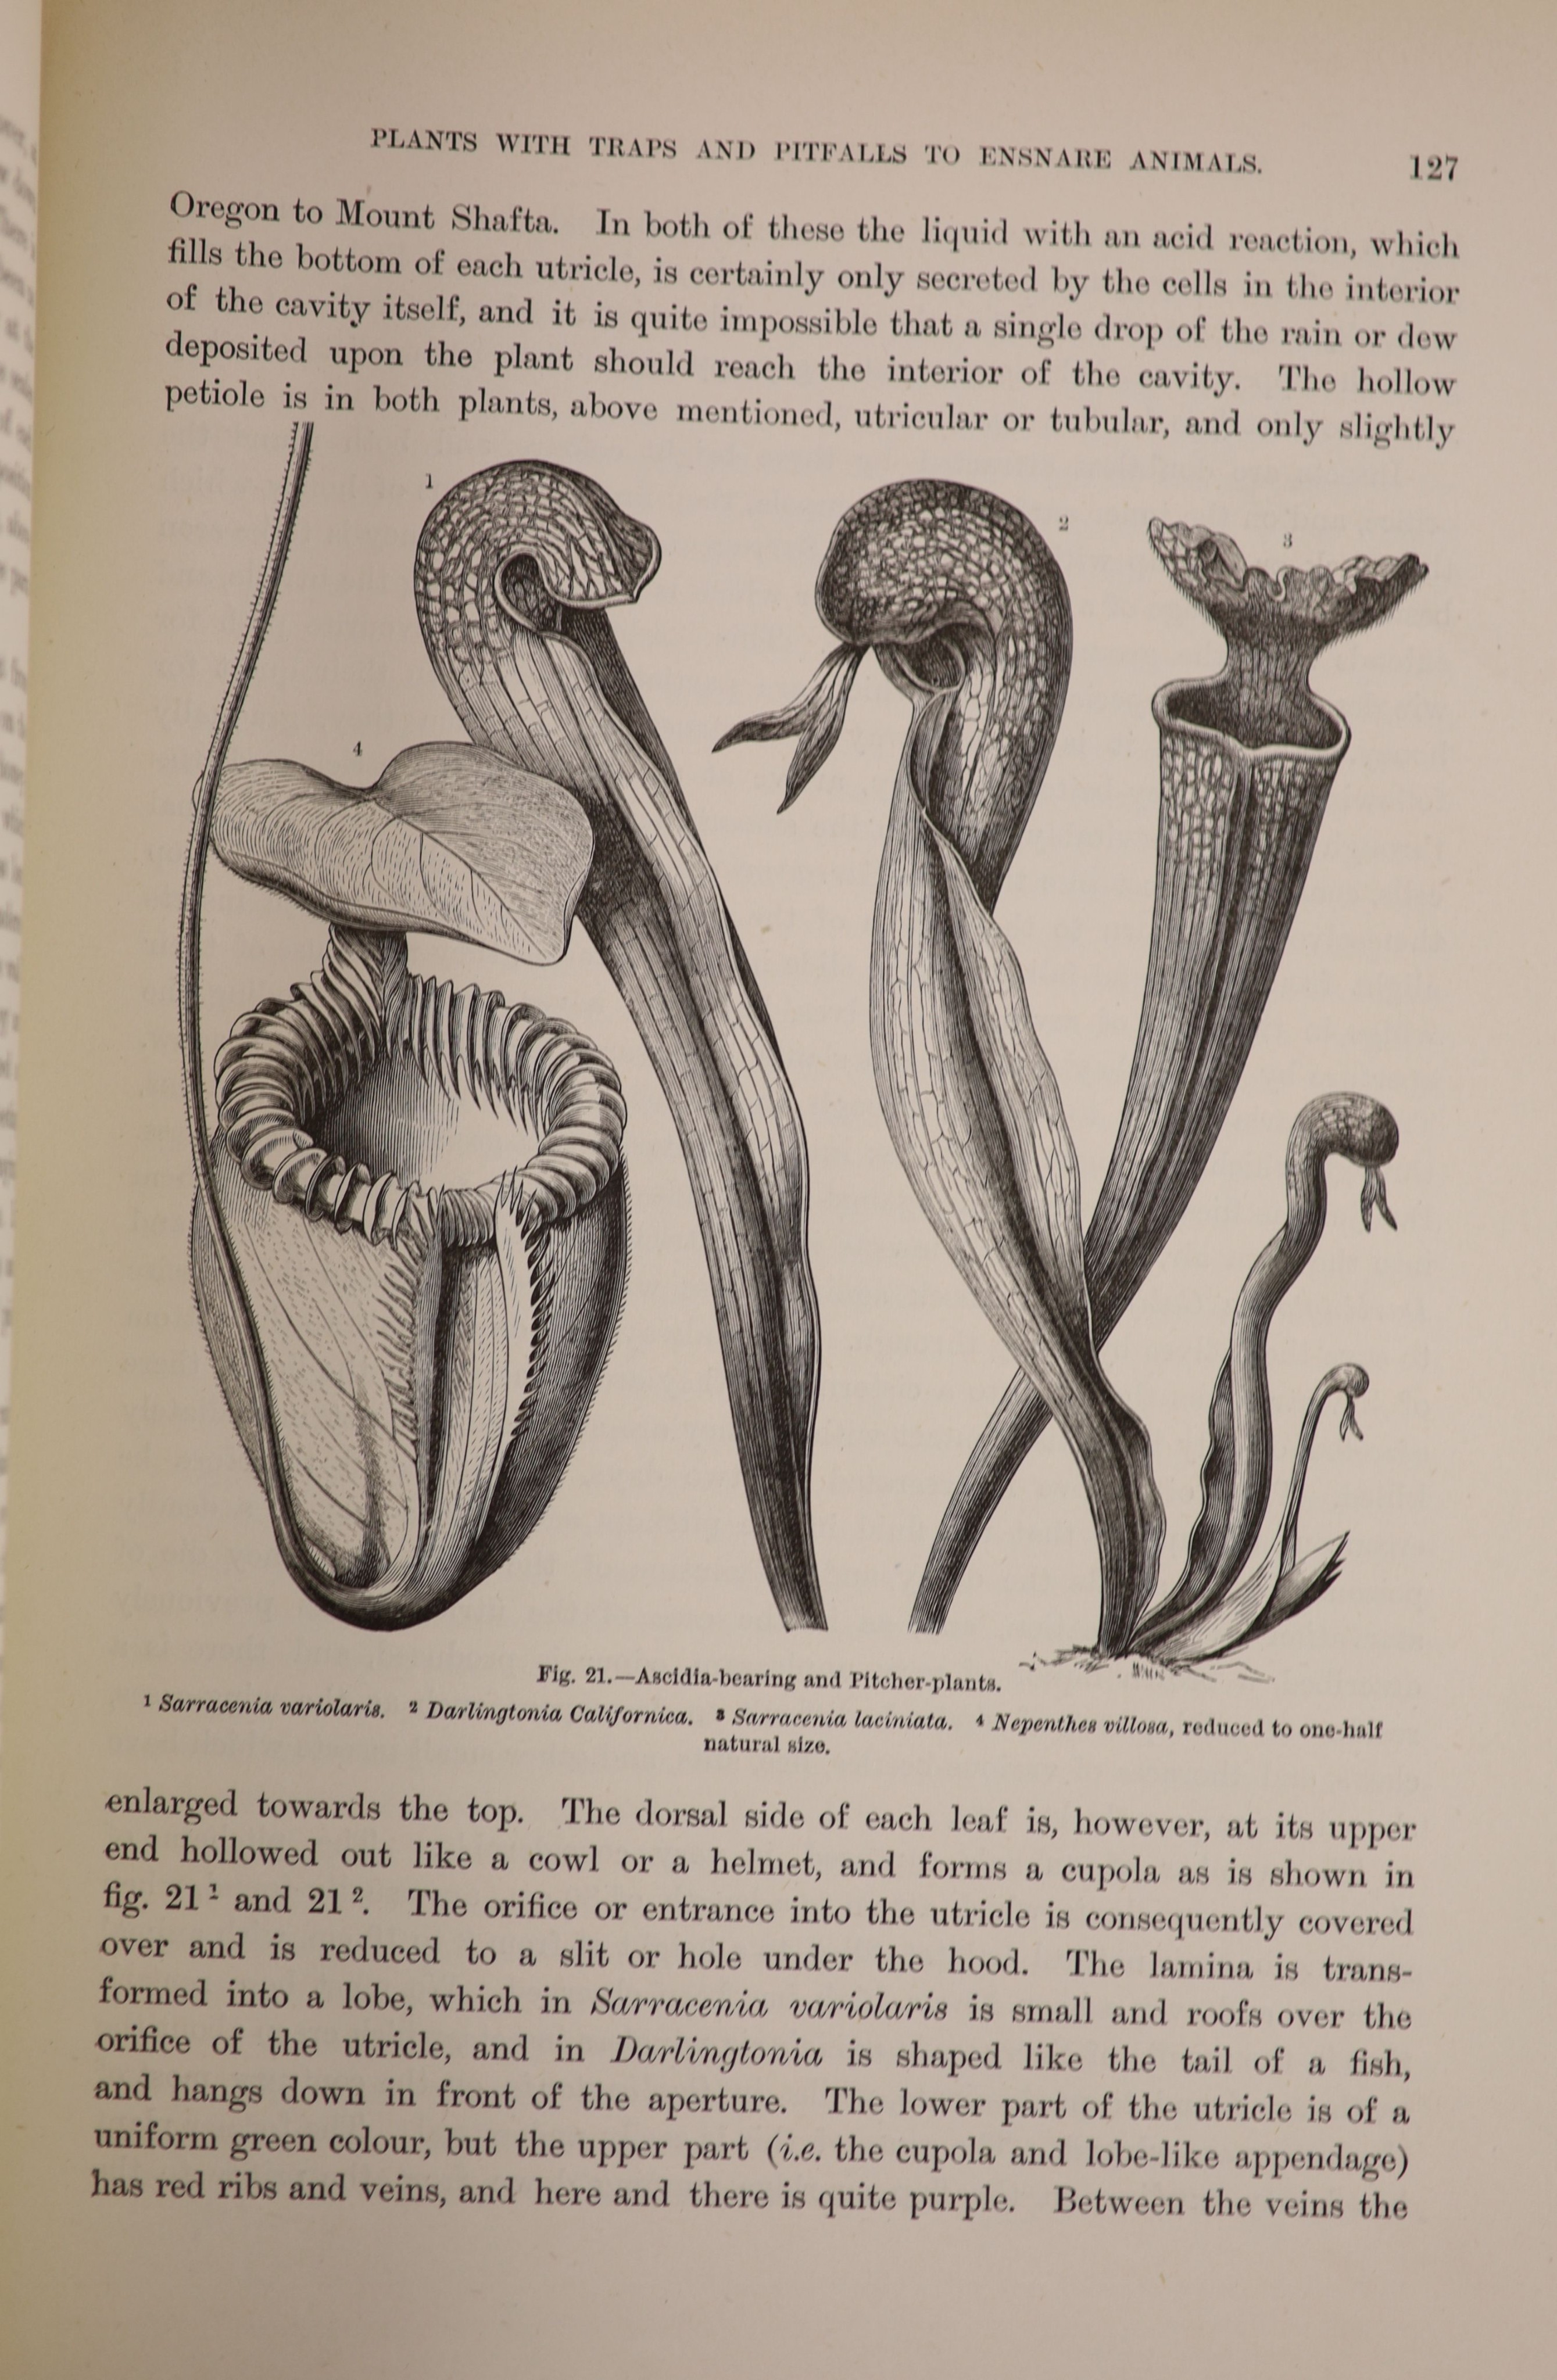 Kerner, Anton [translator], and, Oliver, F.W - The Natural History of Plants their Forms, Growth, Reproduction and Distribution. 2 vols. Complete with a quoted 200 text illustrations and with 16 coloured plates, many of